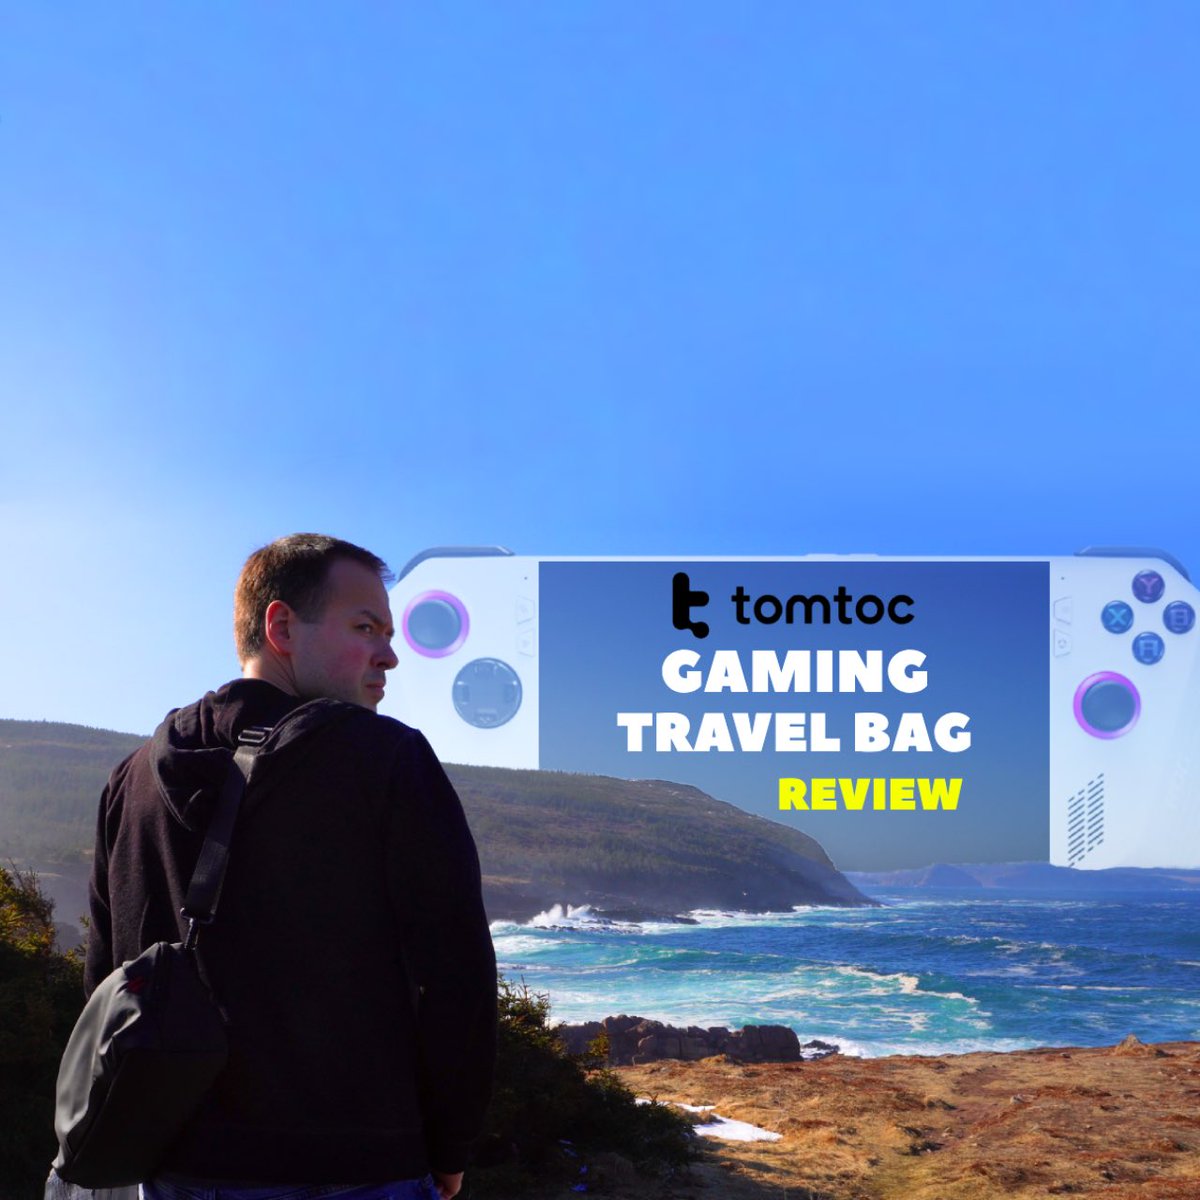 Just took my ASUS ROG Ally on an adventure with the tomtoc Arccos-G47 Handheld Travel Bag! 🎮✨ Perfect for Steam Deck, Lenovo Legion Go, and more! Link to review vid to see how it handled my journey! ▶️ youtu.be/P761mTK0Nog #travel #travelbag #gaming #tomtoc @tomtoc_official